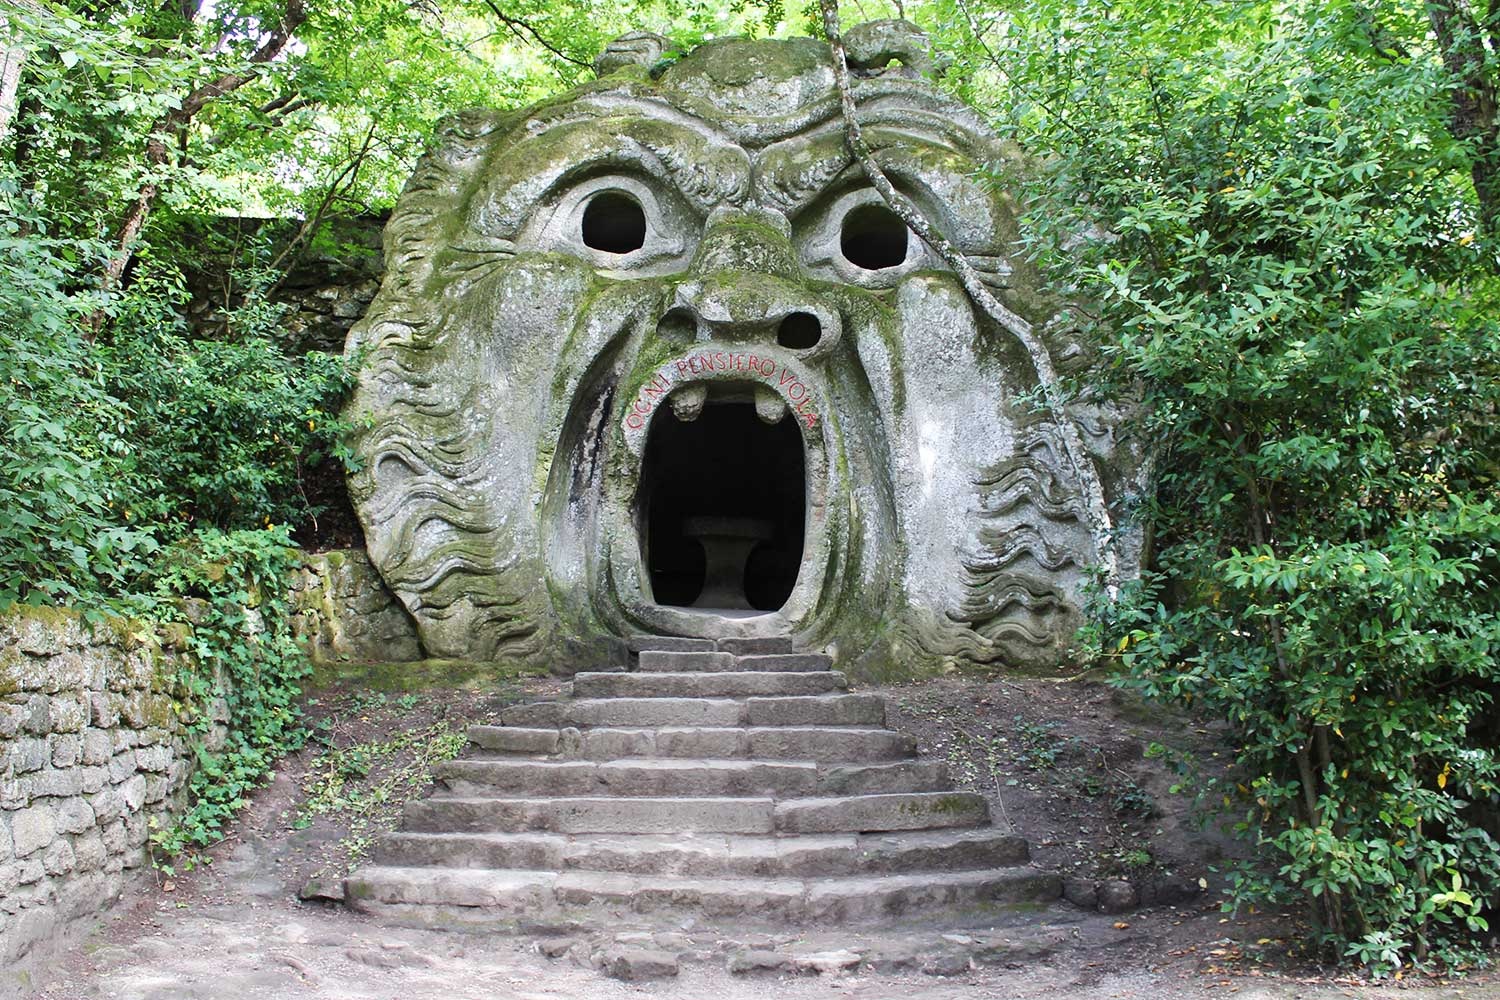 Park of the Monsters of Bomarzo - 17 km - 18 minutes